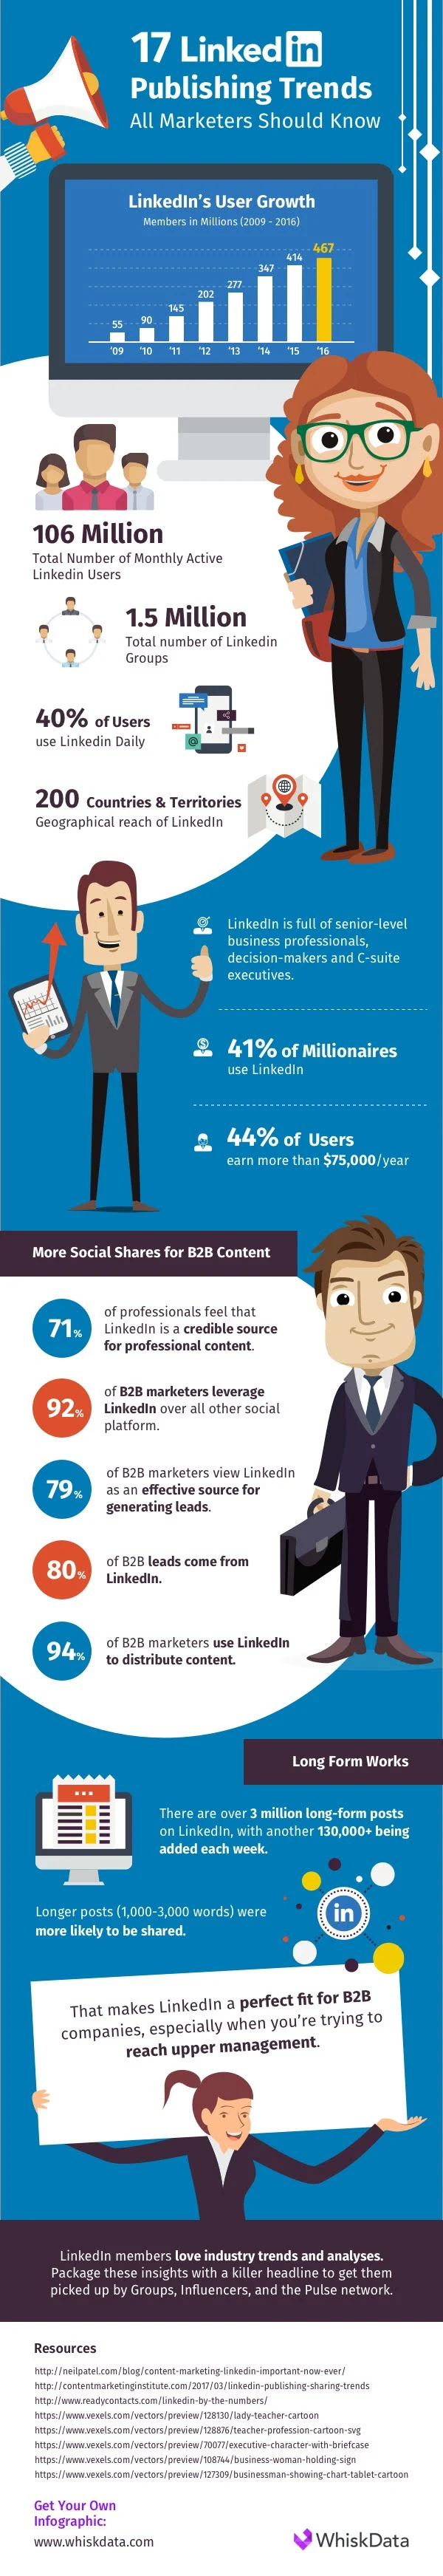 17 LinkedIn Publishing Trends All Marketers Should Know - #Infographic